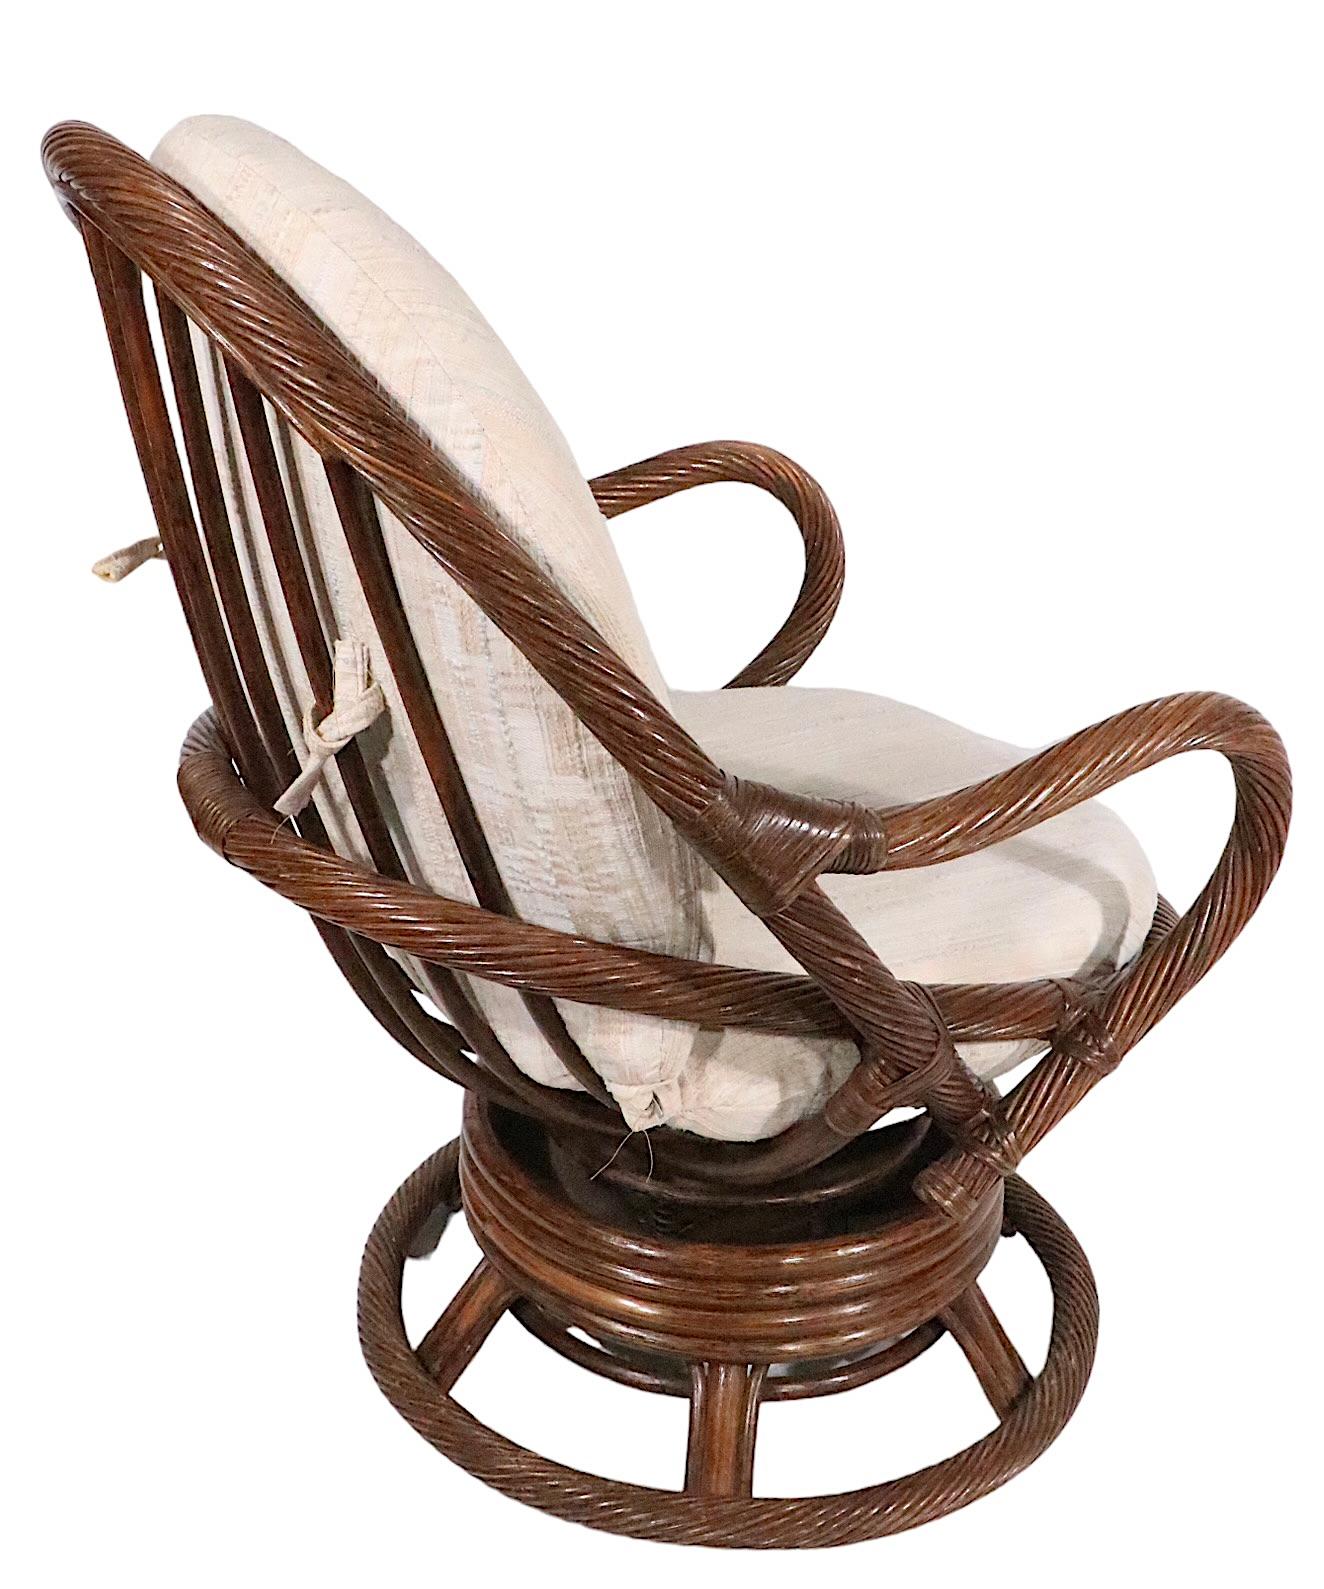 Late 20th Century Wrapped Reed and Bamboo Swivel Tilt Lounge Chair c. 1970's For Sale